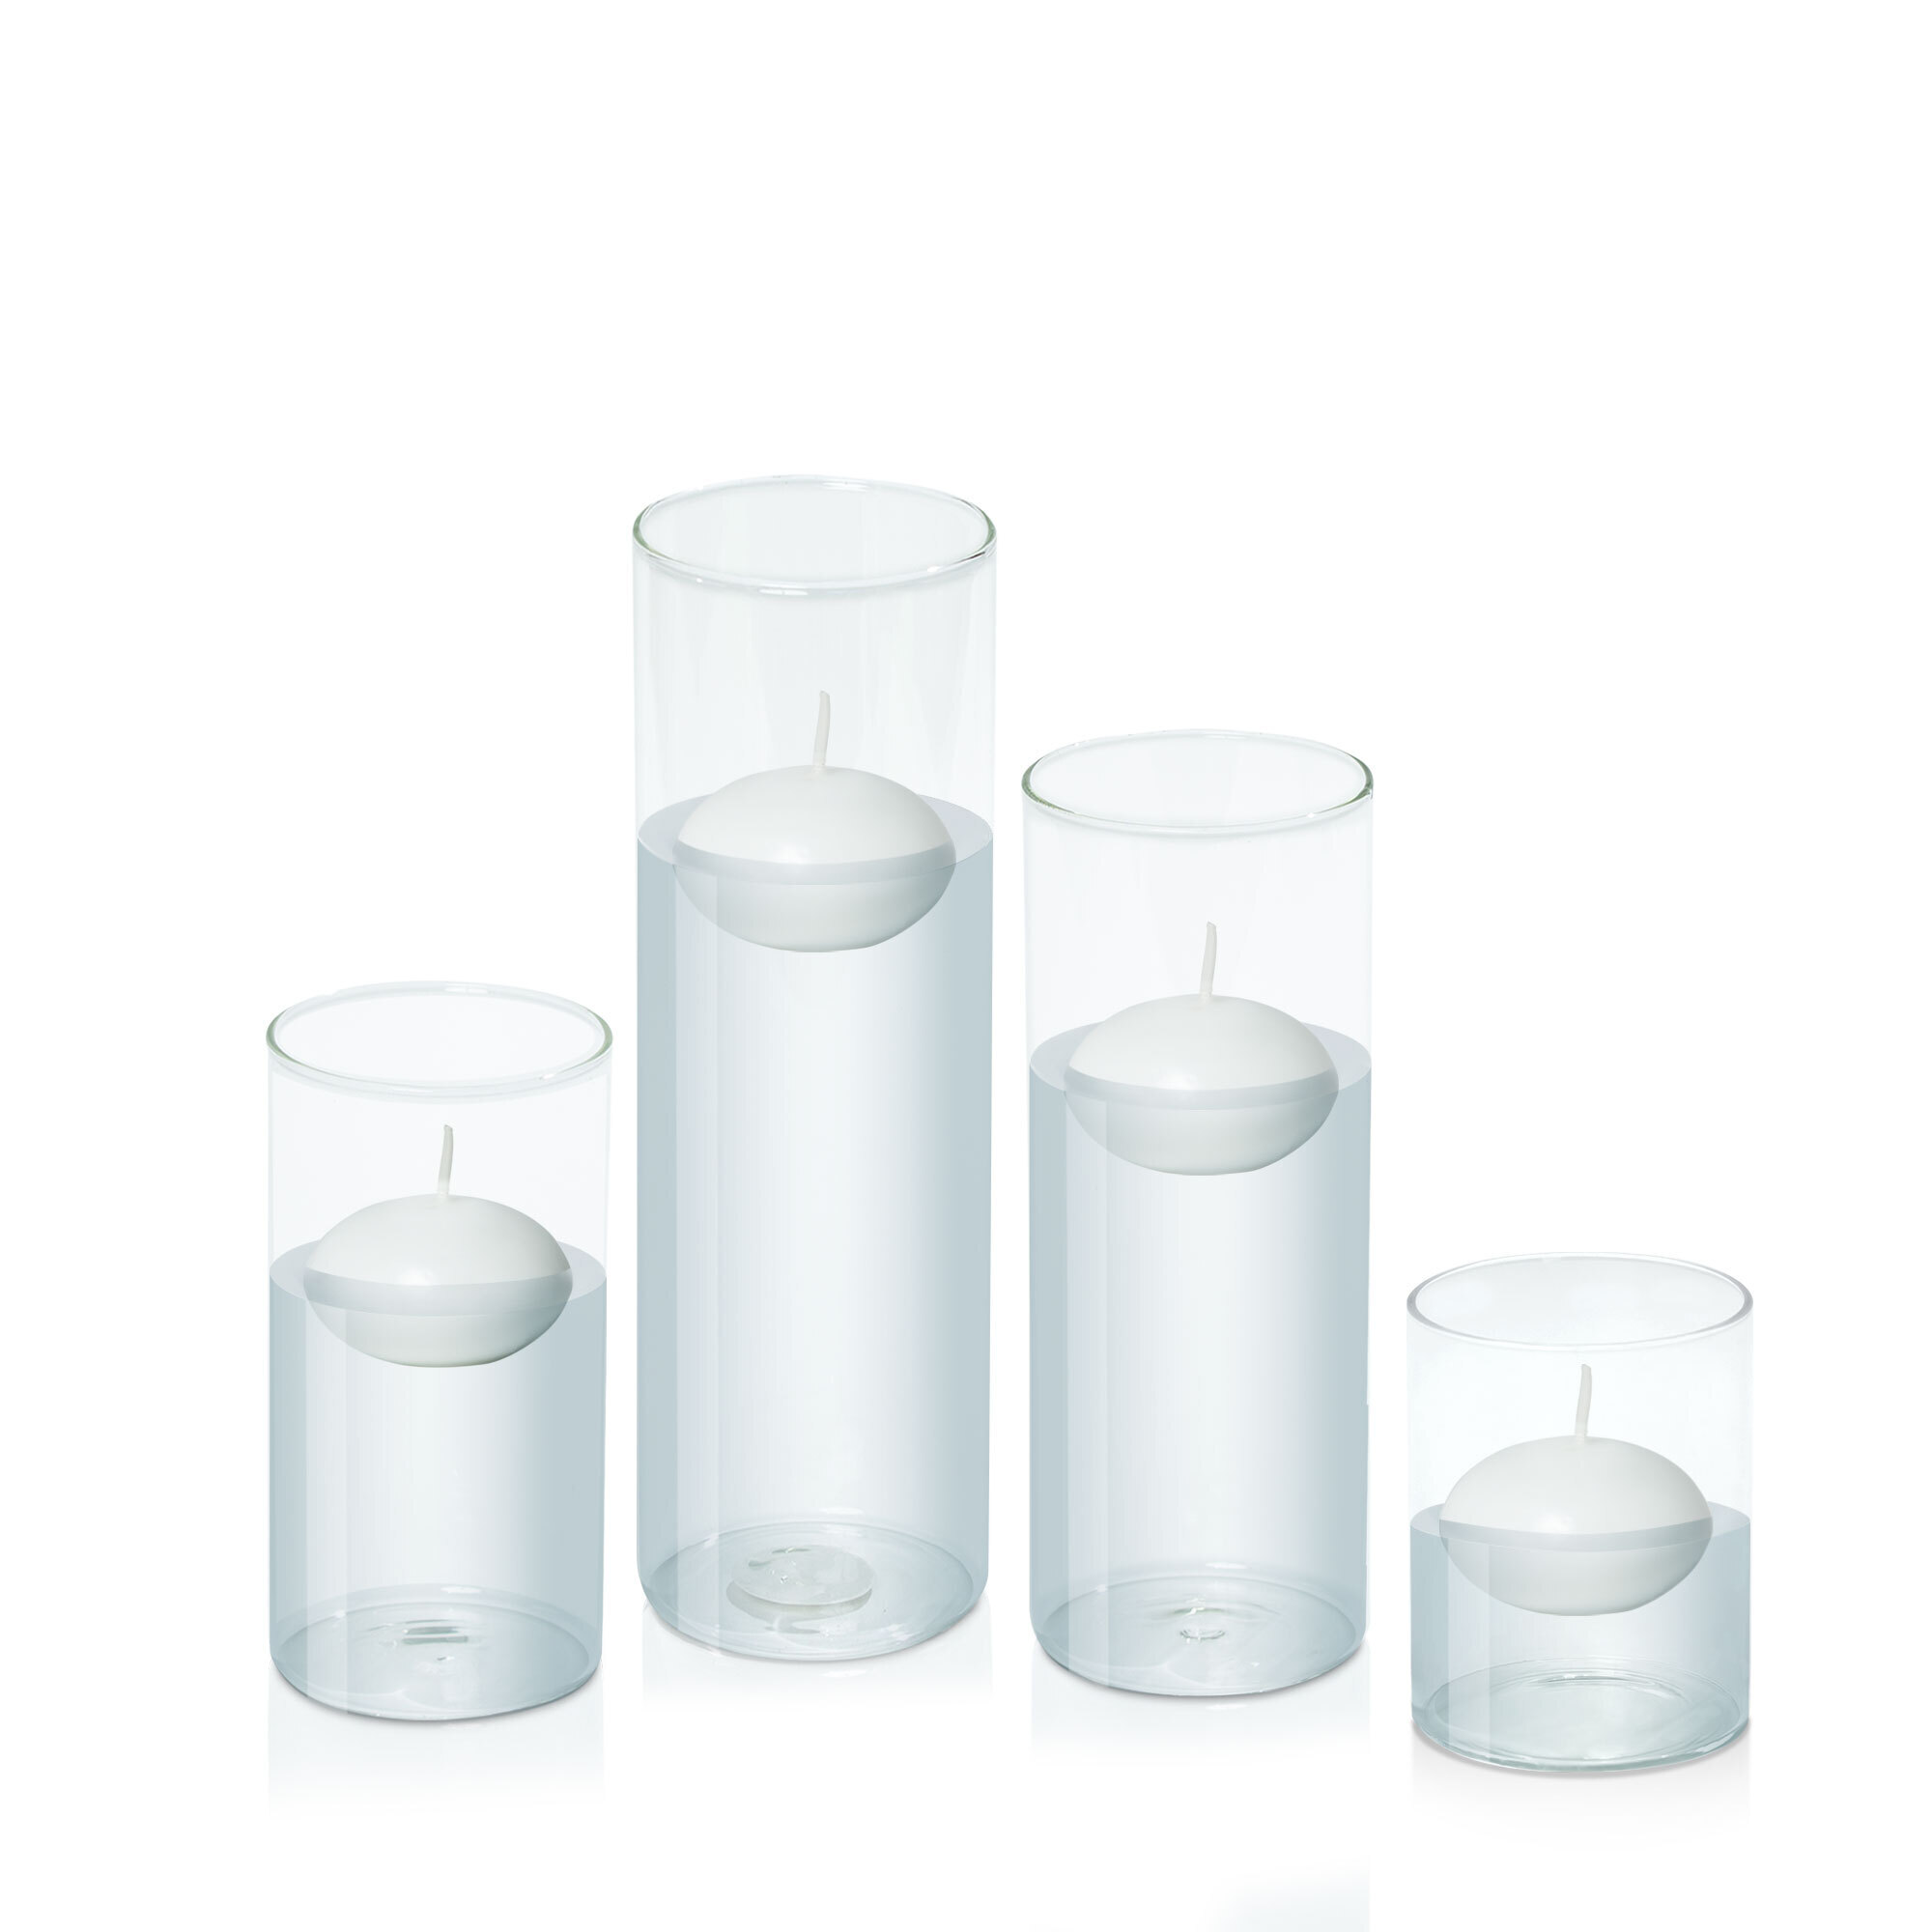 6.5cm Floating Candle in 8cm Glass Set - Sm